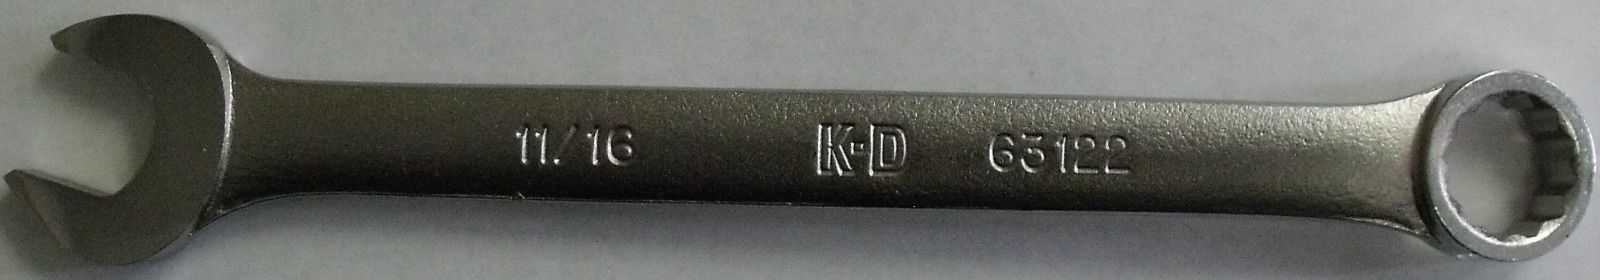 KD Tools 63122 12 Point, 11/16" Combination Wrench USA